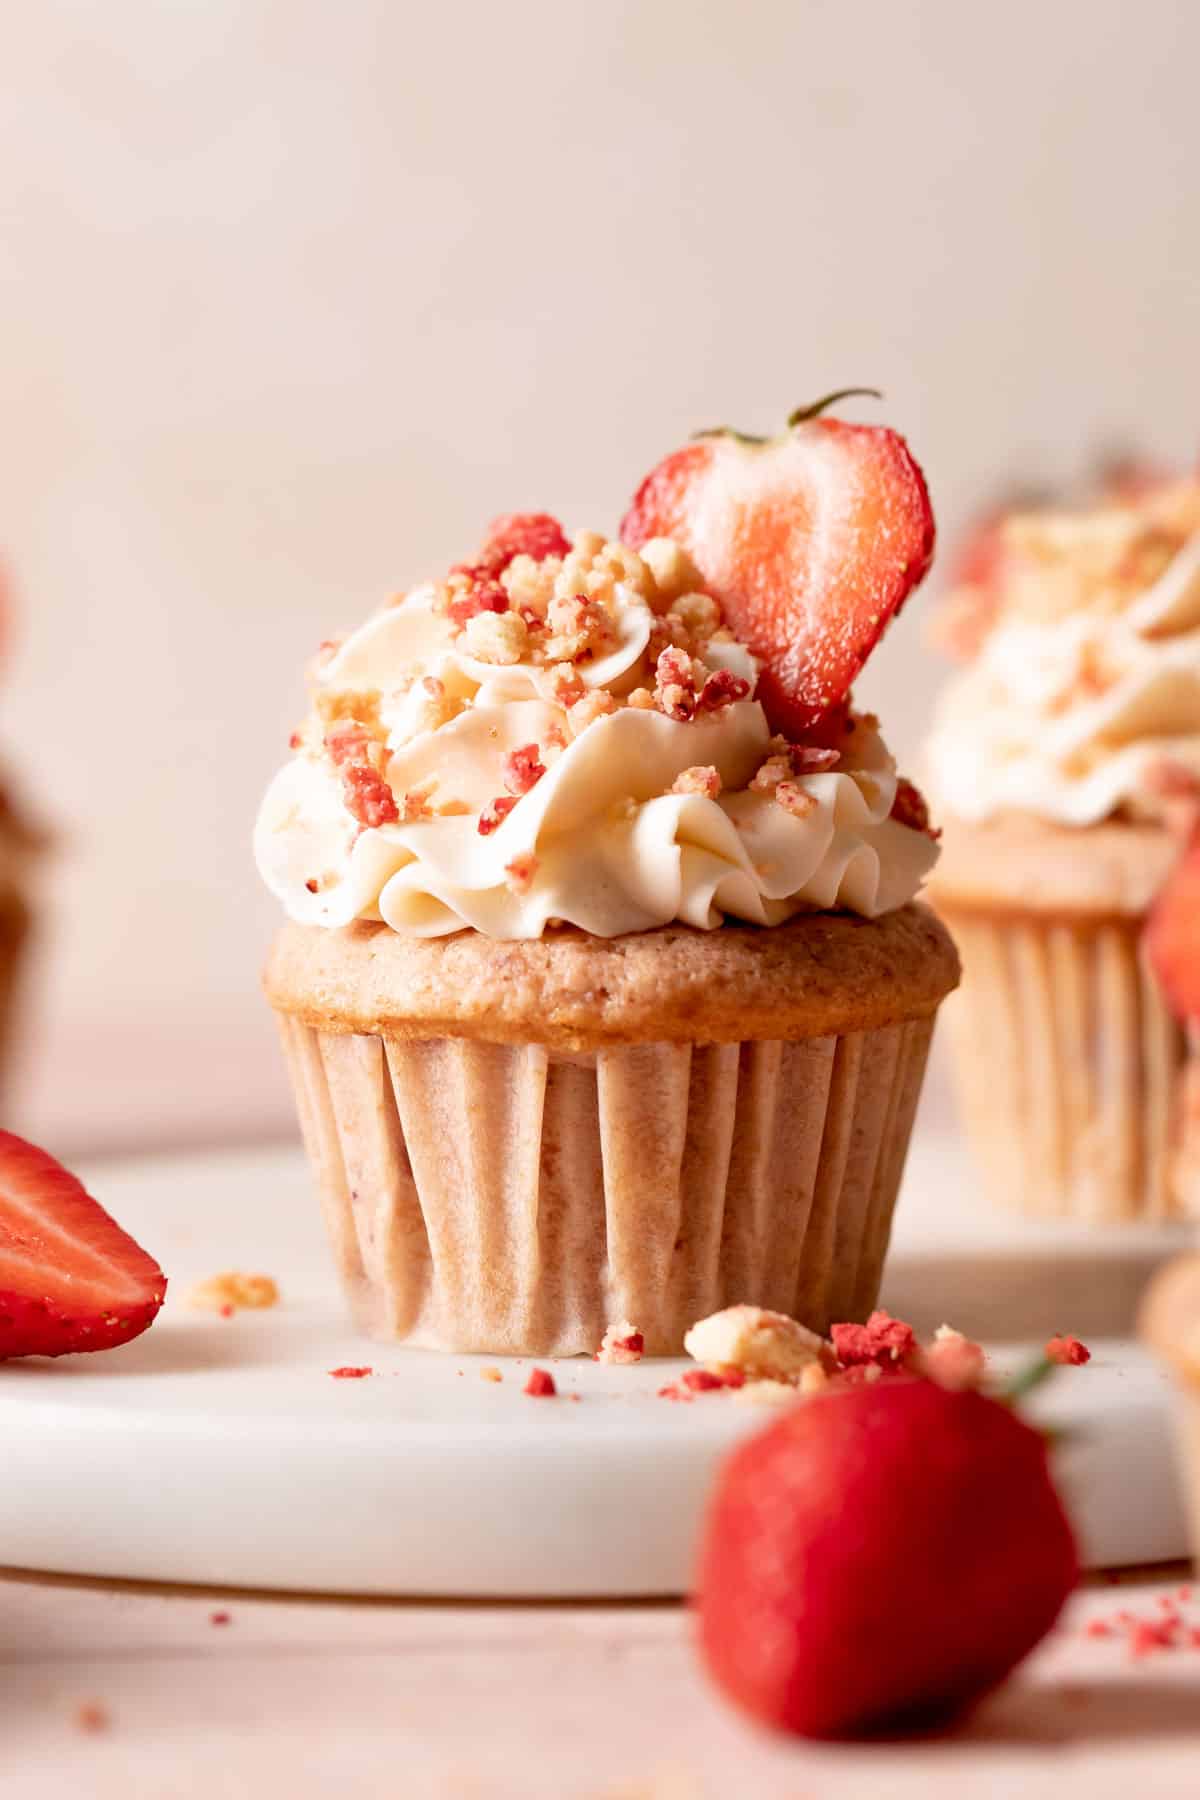 strawberry crunch cupcake with vanilla frosting and crunch topping.